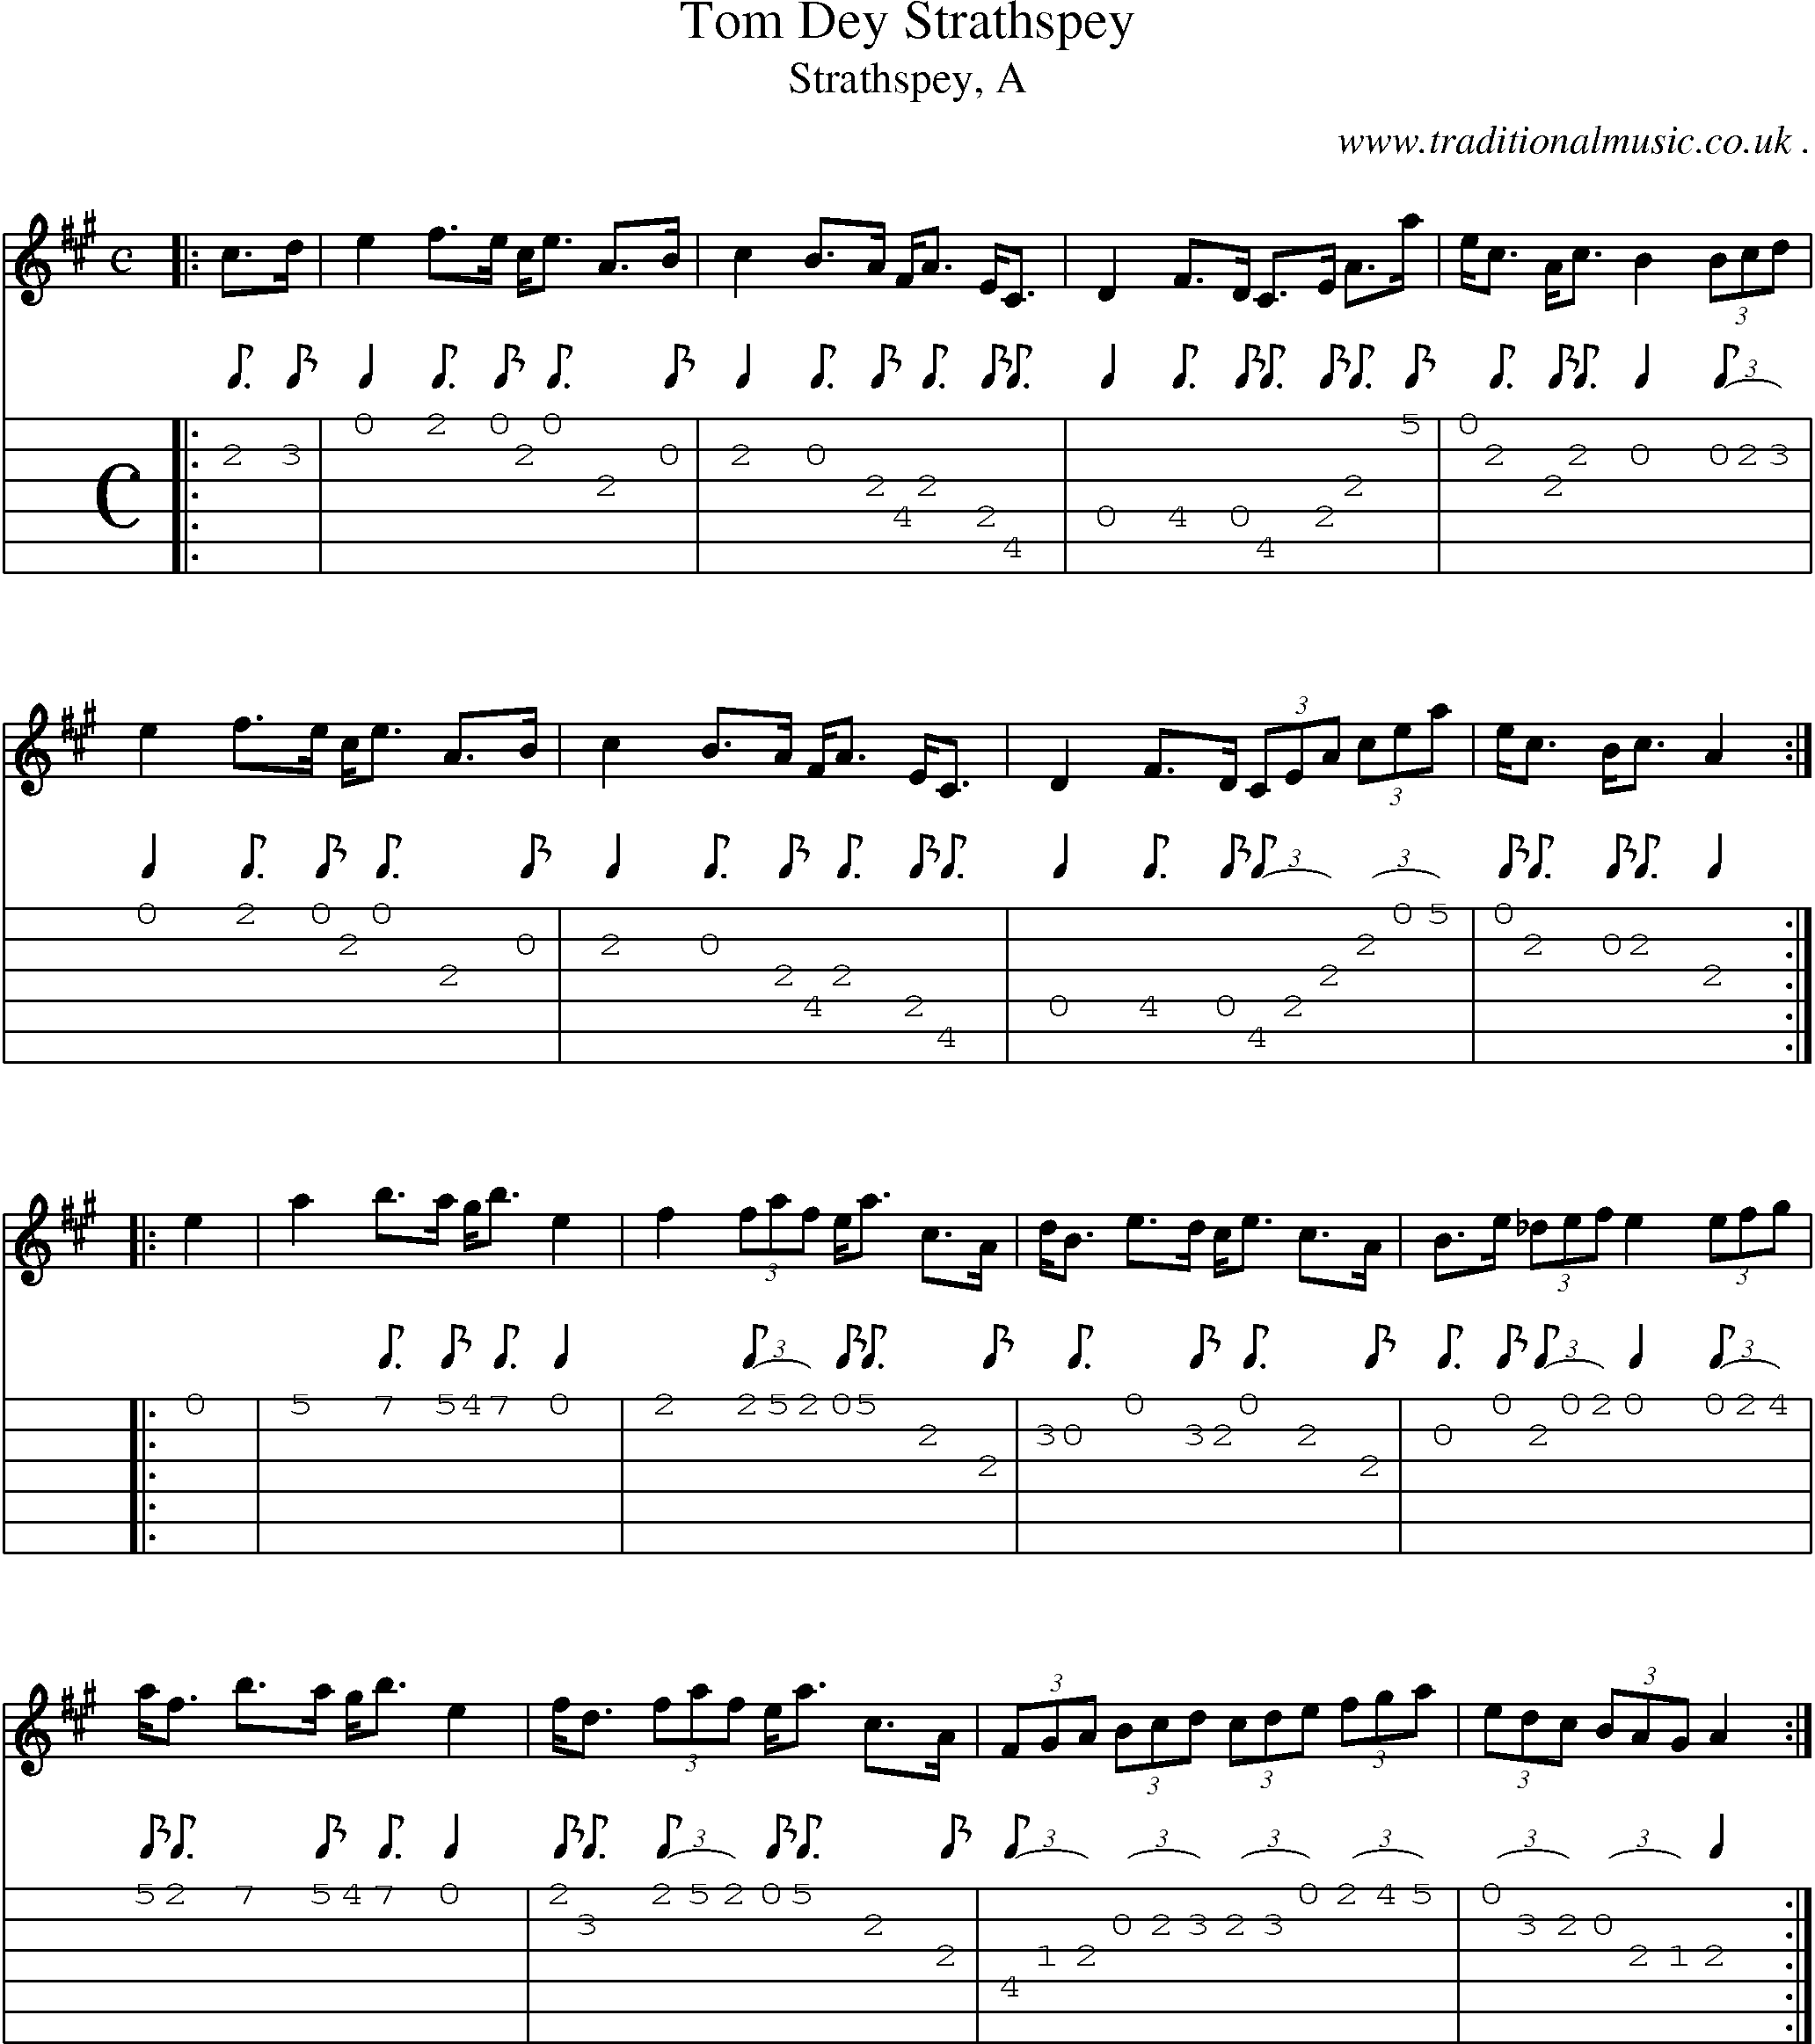 Sheet-music  score, Chords and Guitar Tabs for Tom Dey Strathspey